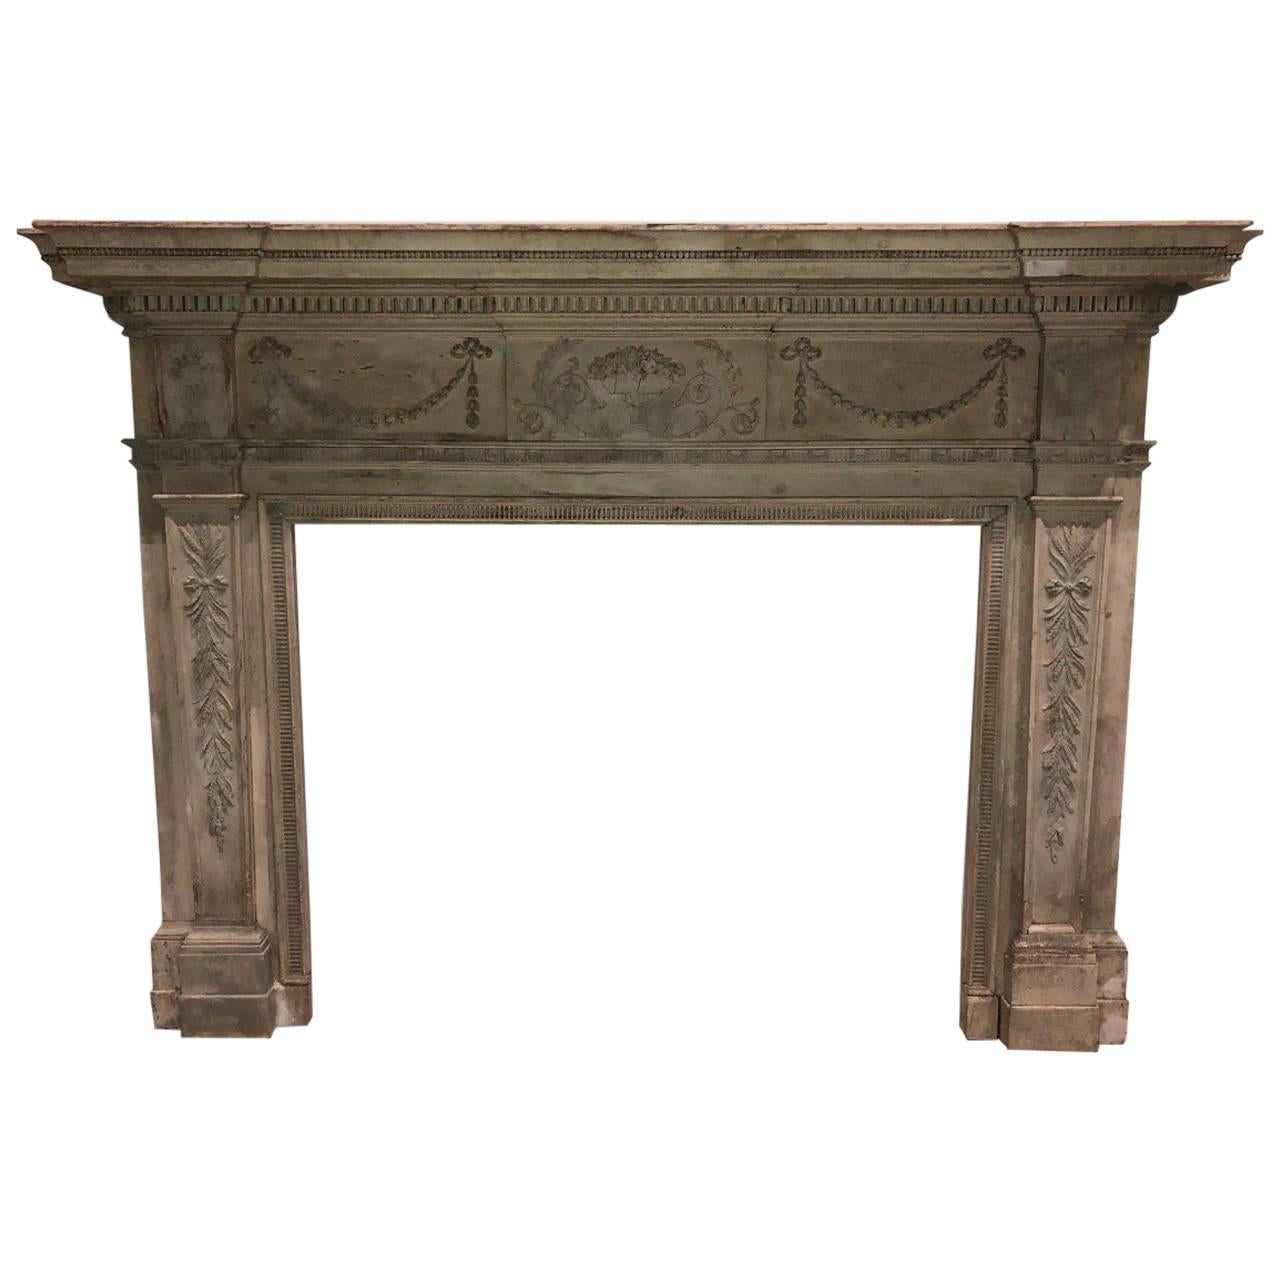 Stunning Federal Revival Fireplace Mantle